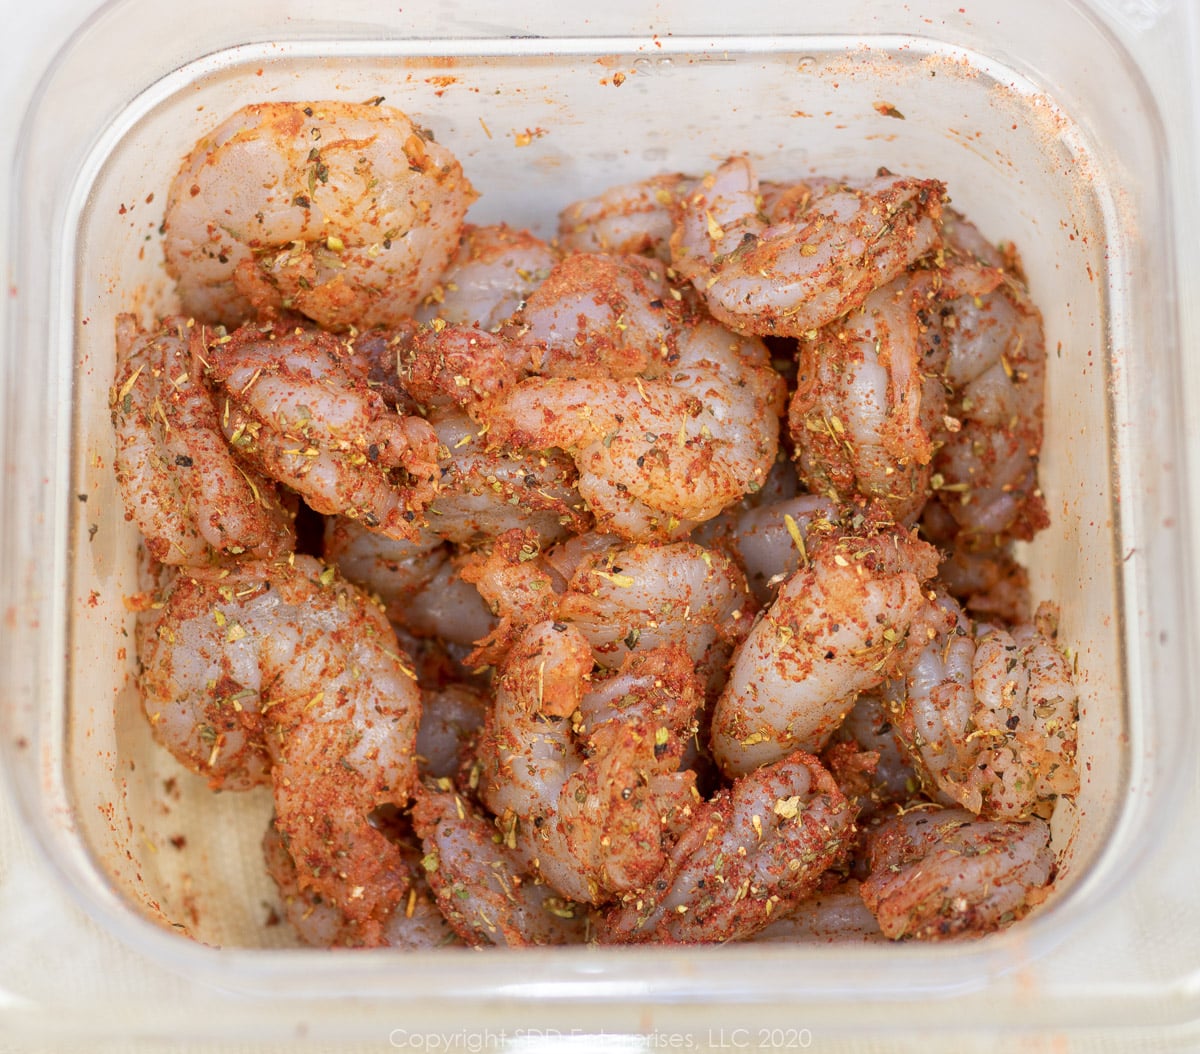 uncooked shrimp with seasoning